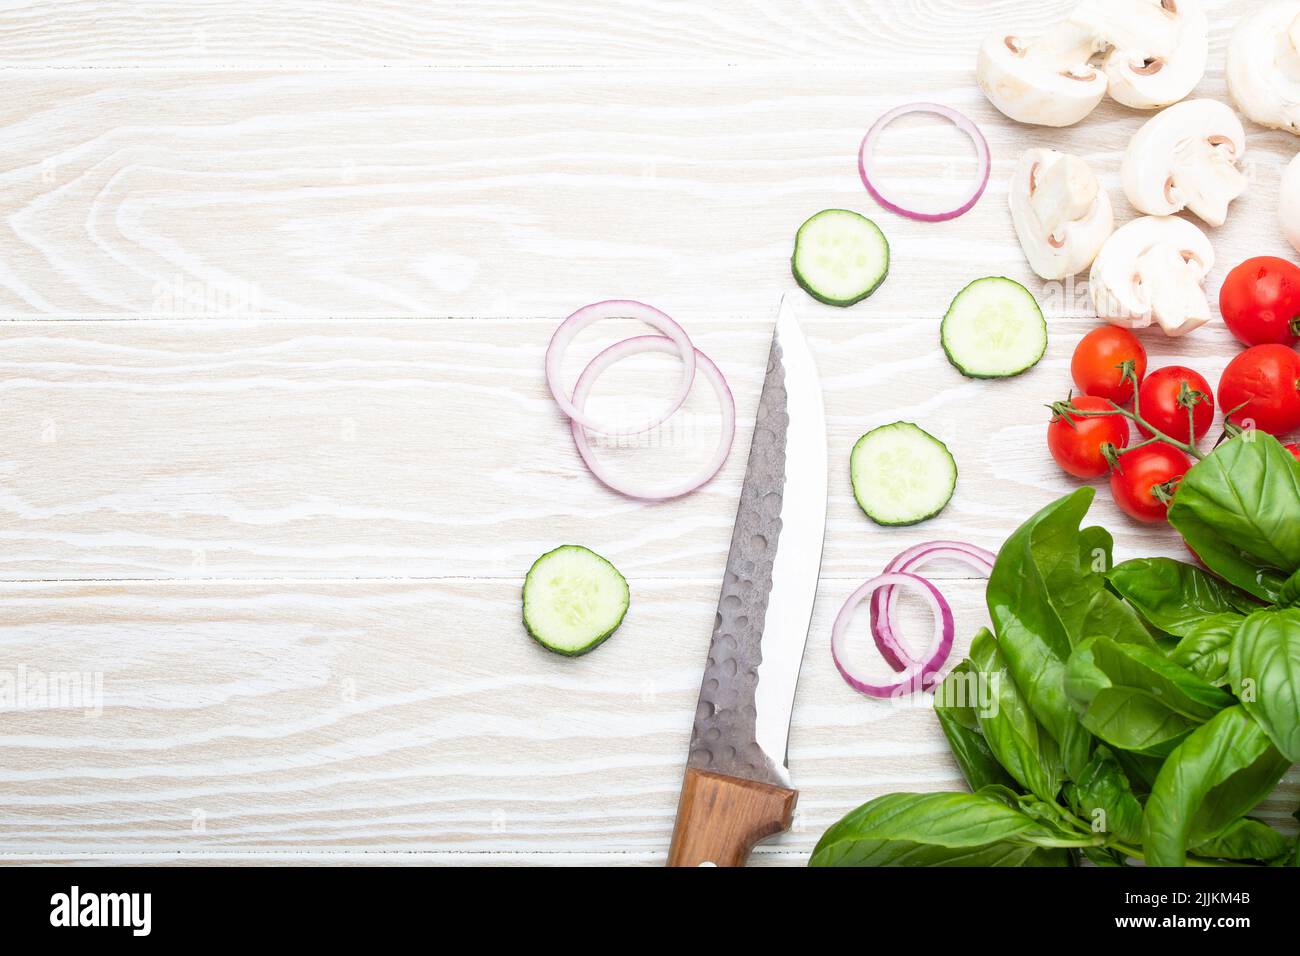 Food cooking background with vegetable ingredients copy space Stock Photo